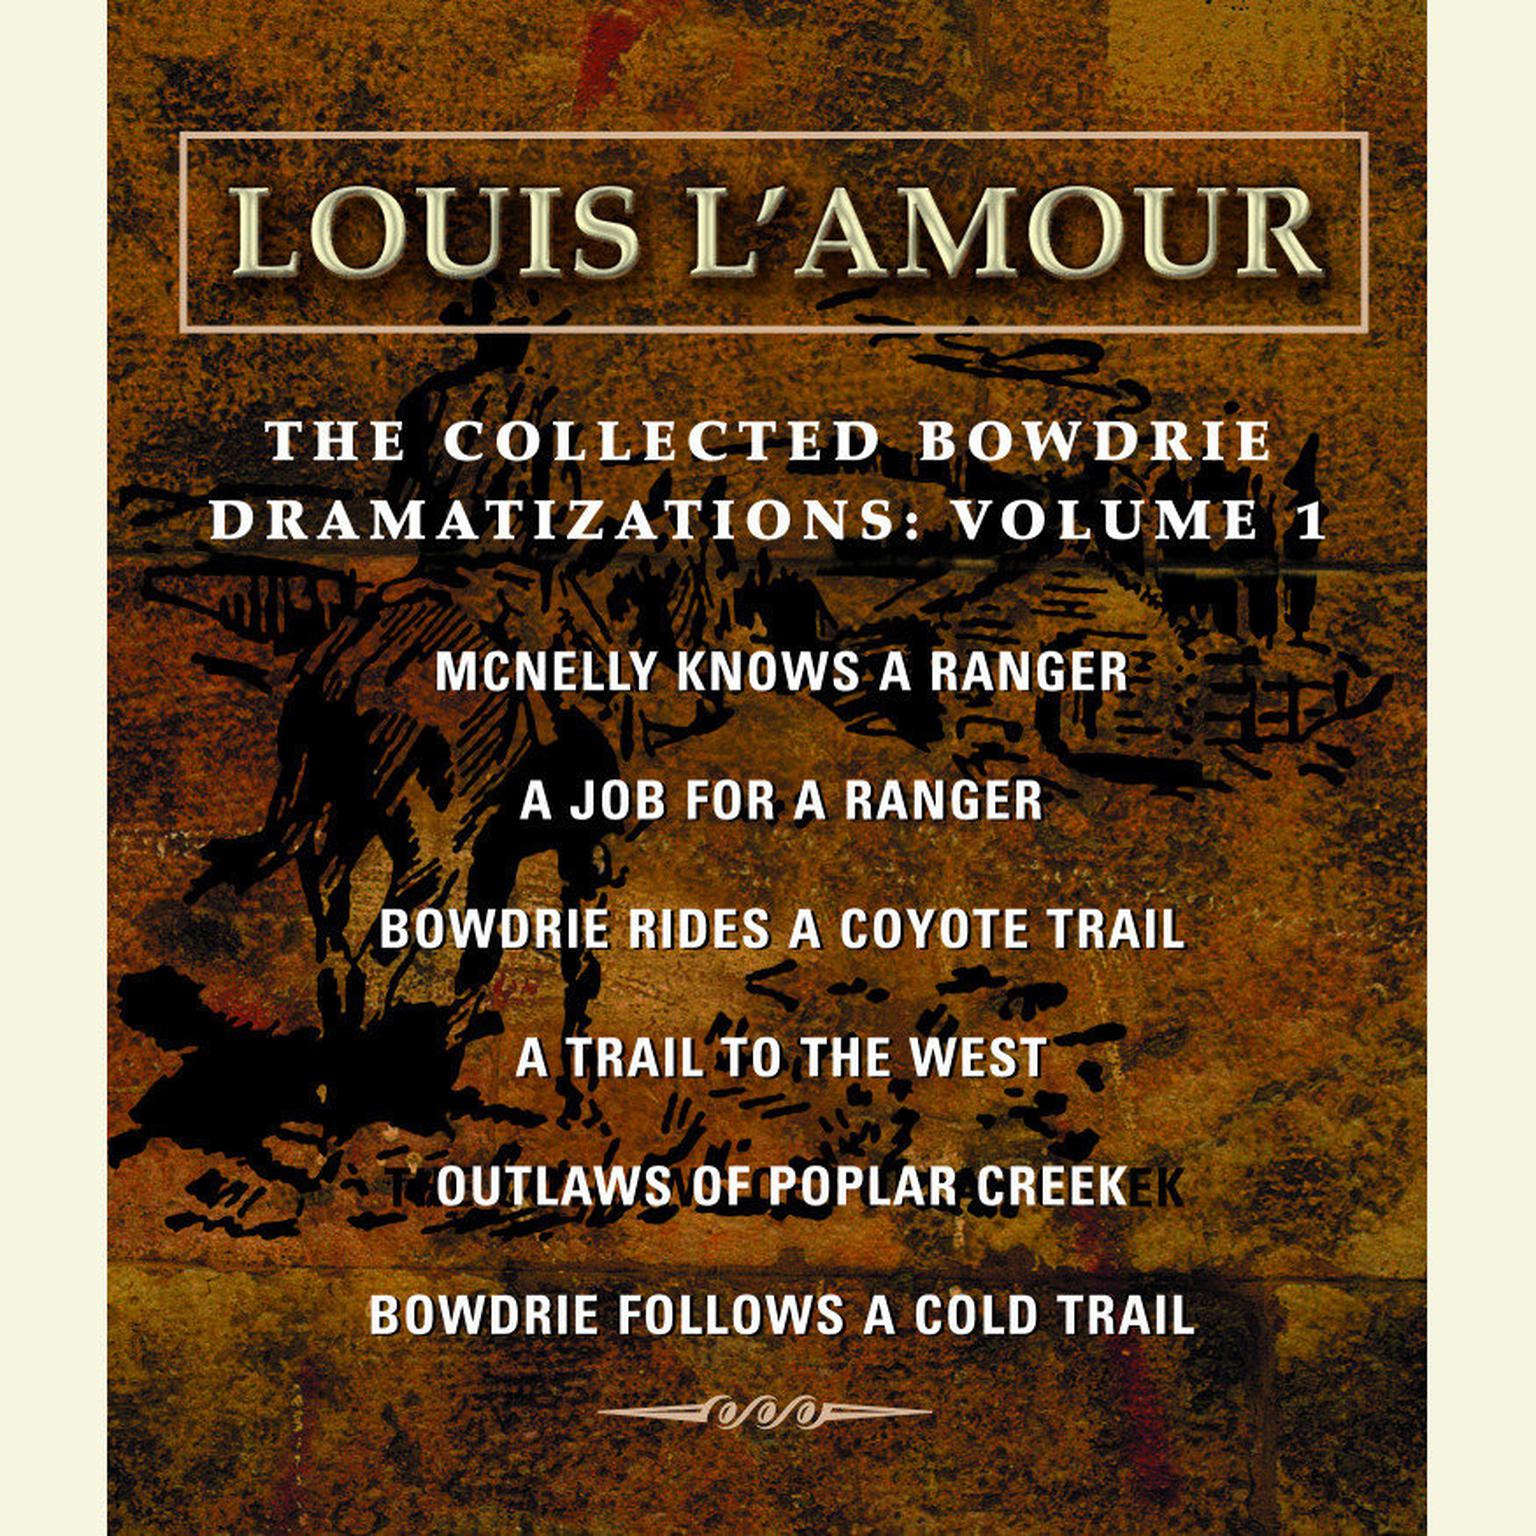 The Collected Bowdrie Dramatizations: Volume 1 Audiobook, by Louis L’Amour